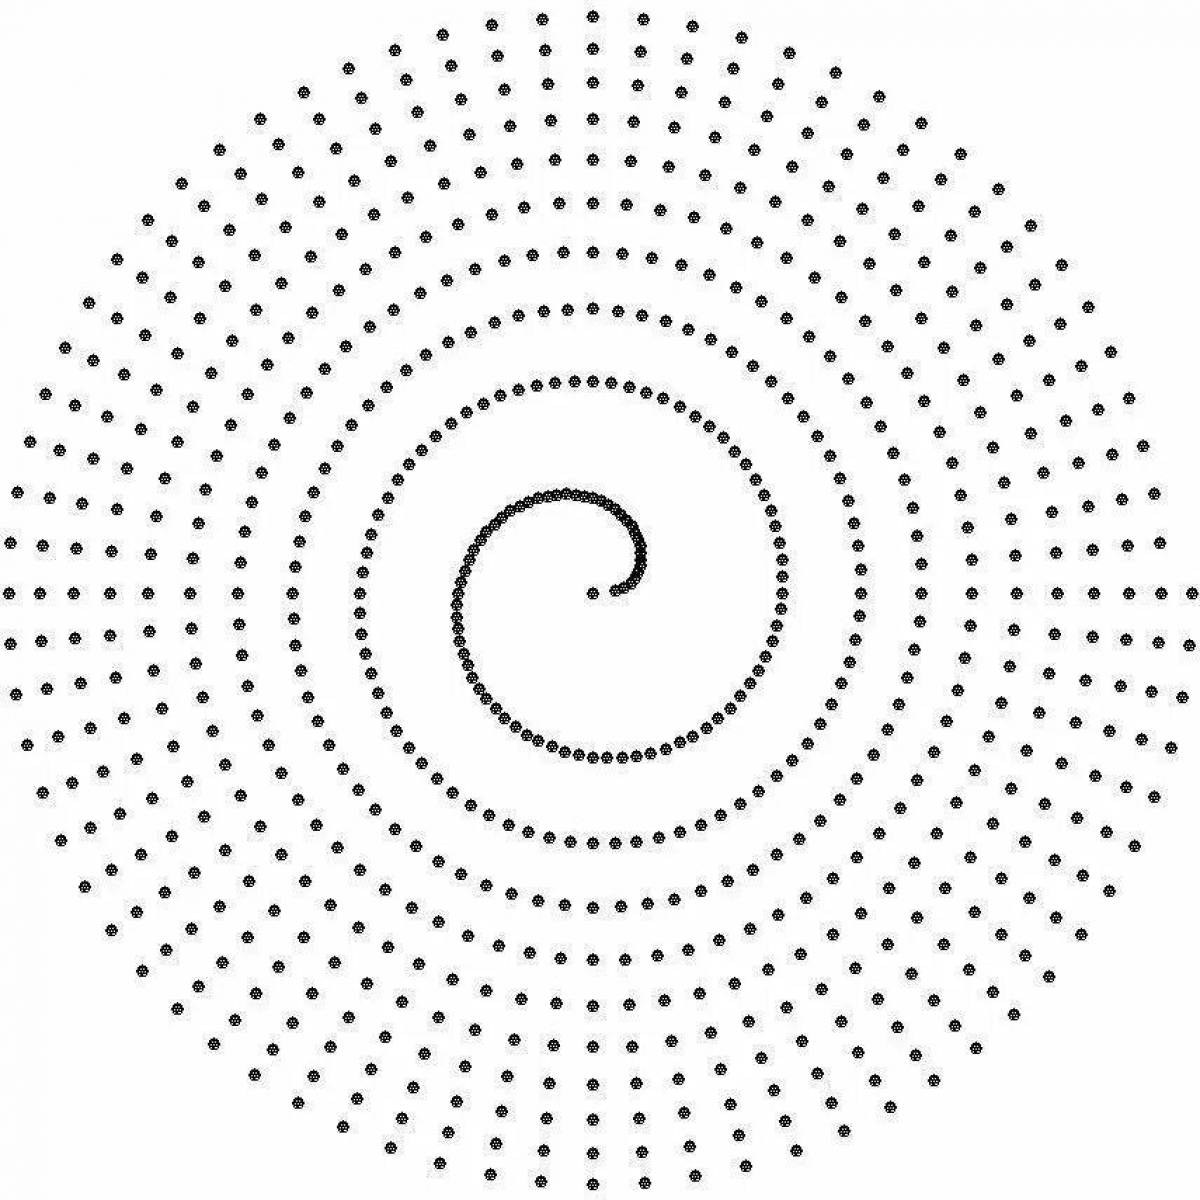 Colour-filled circular spiral to create a coloring page